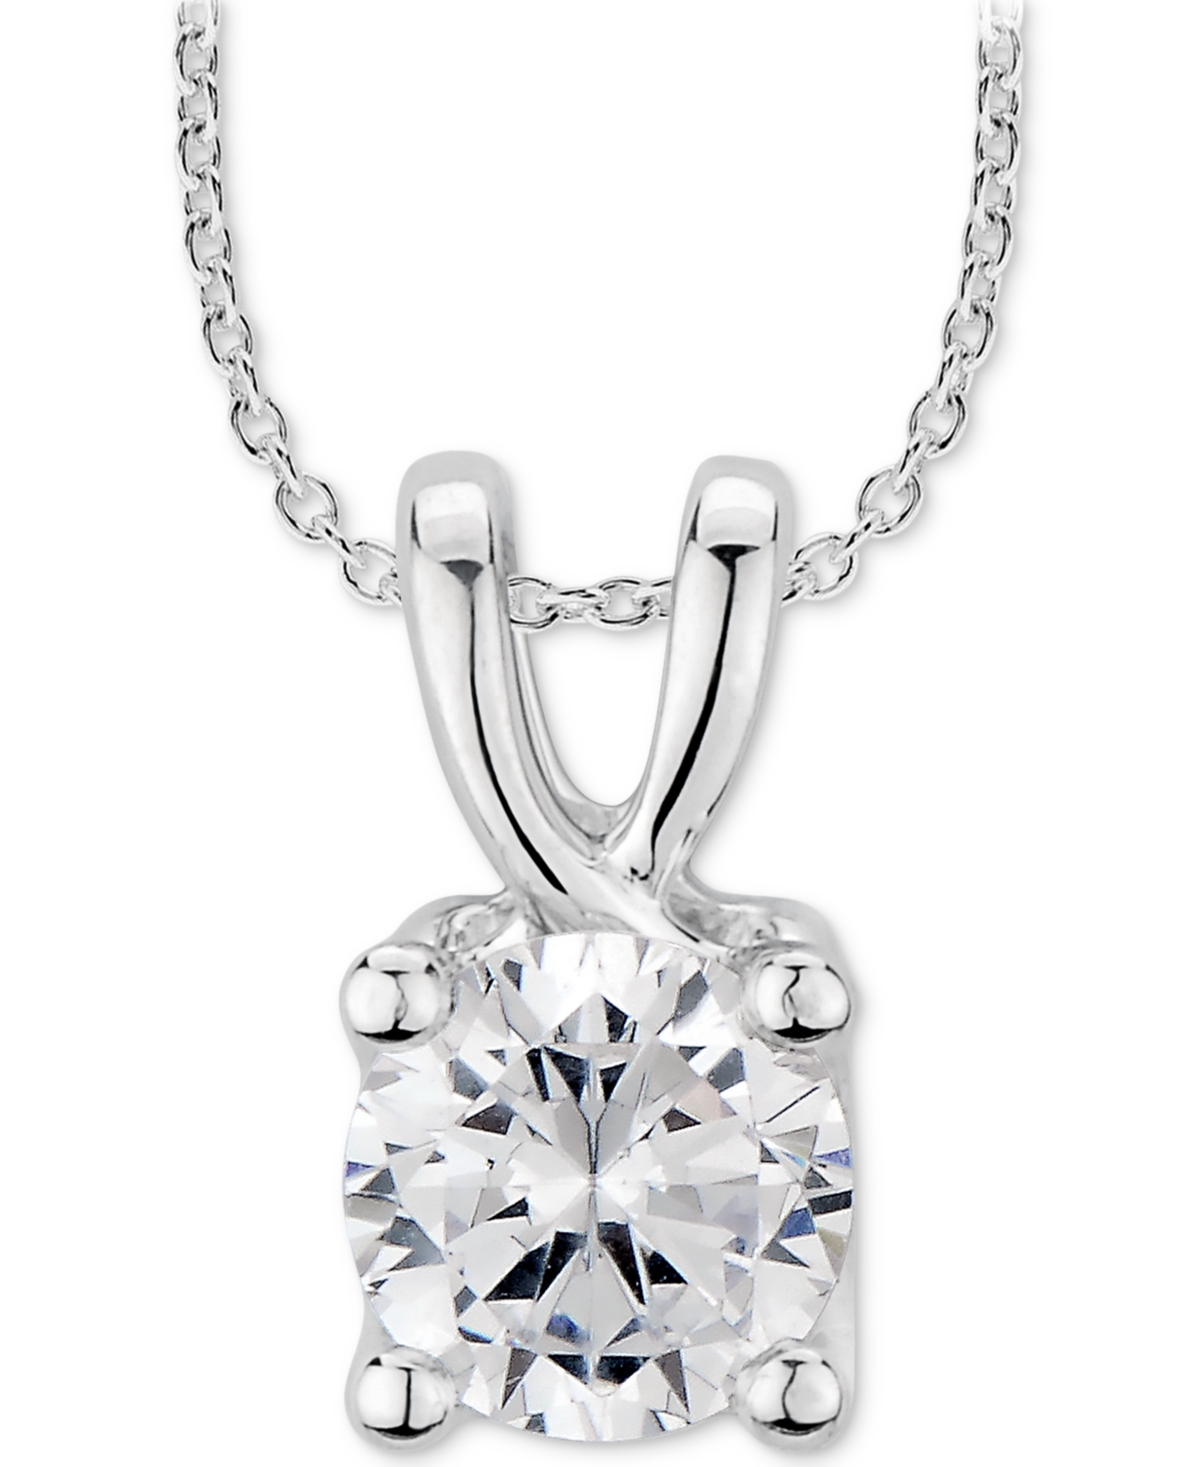 Gia Certified Diamond Solitaire 18" Pendant Necklace (1 ct. t.w.) in 14k White Gold - White Gold